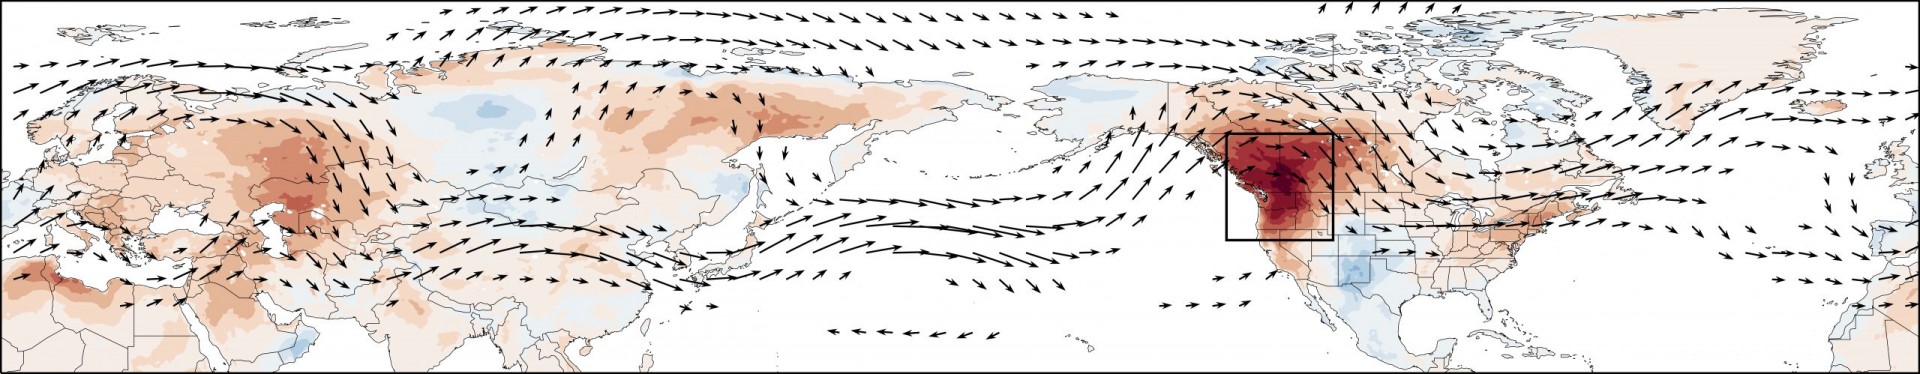 map with arrows showing the direction of wind across the globe